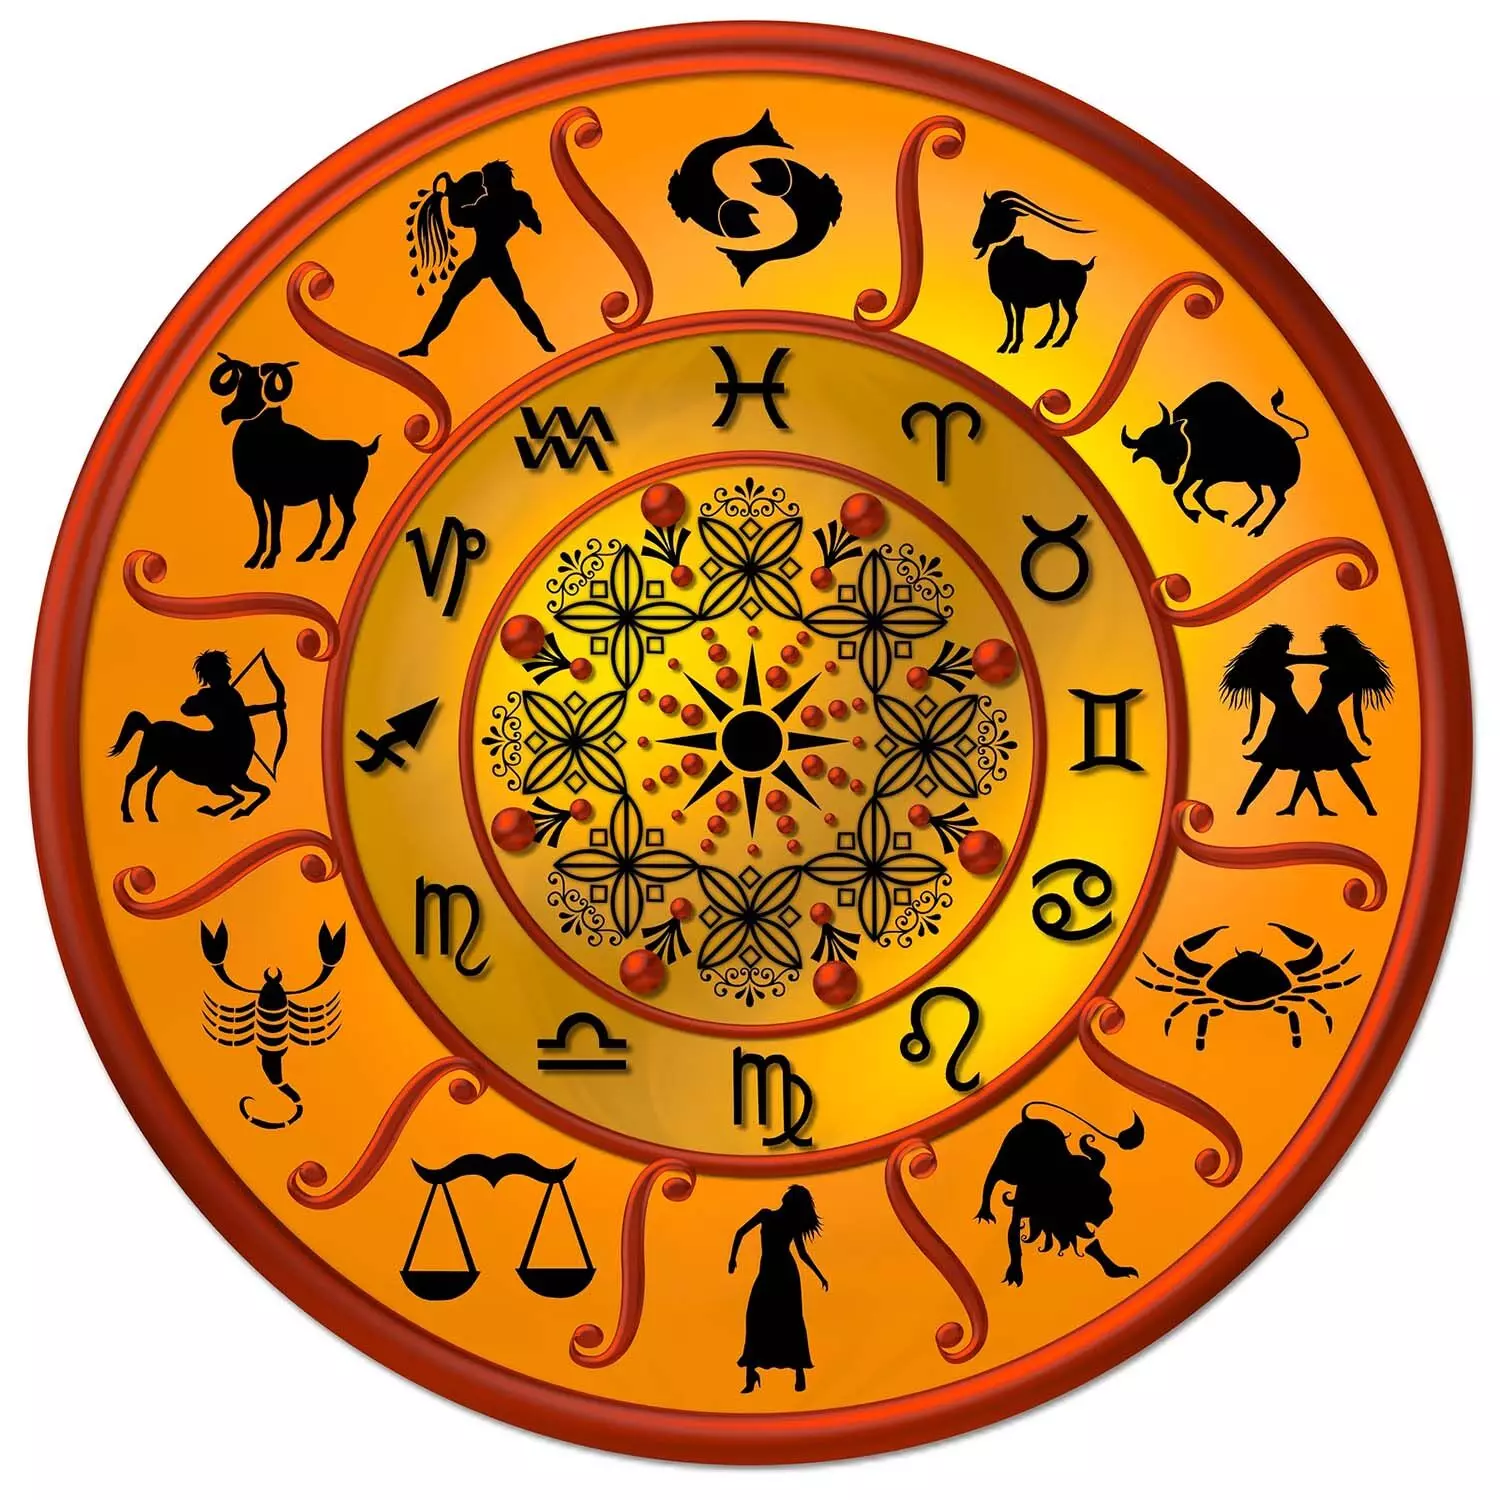 1st July – Know your todays horoscope